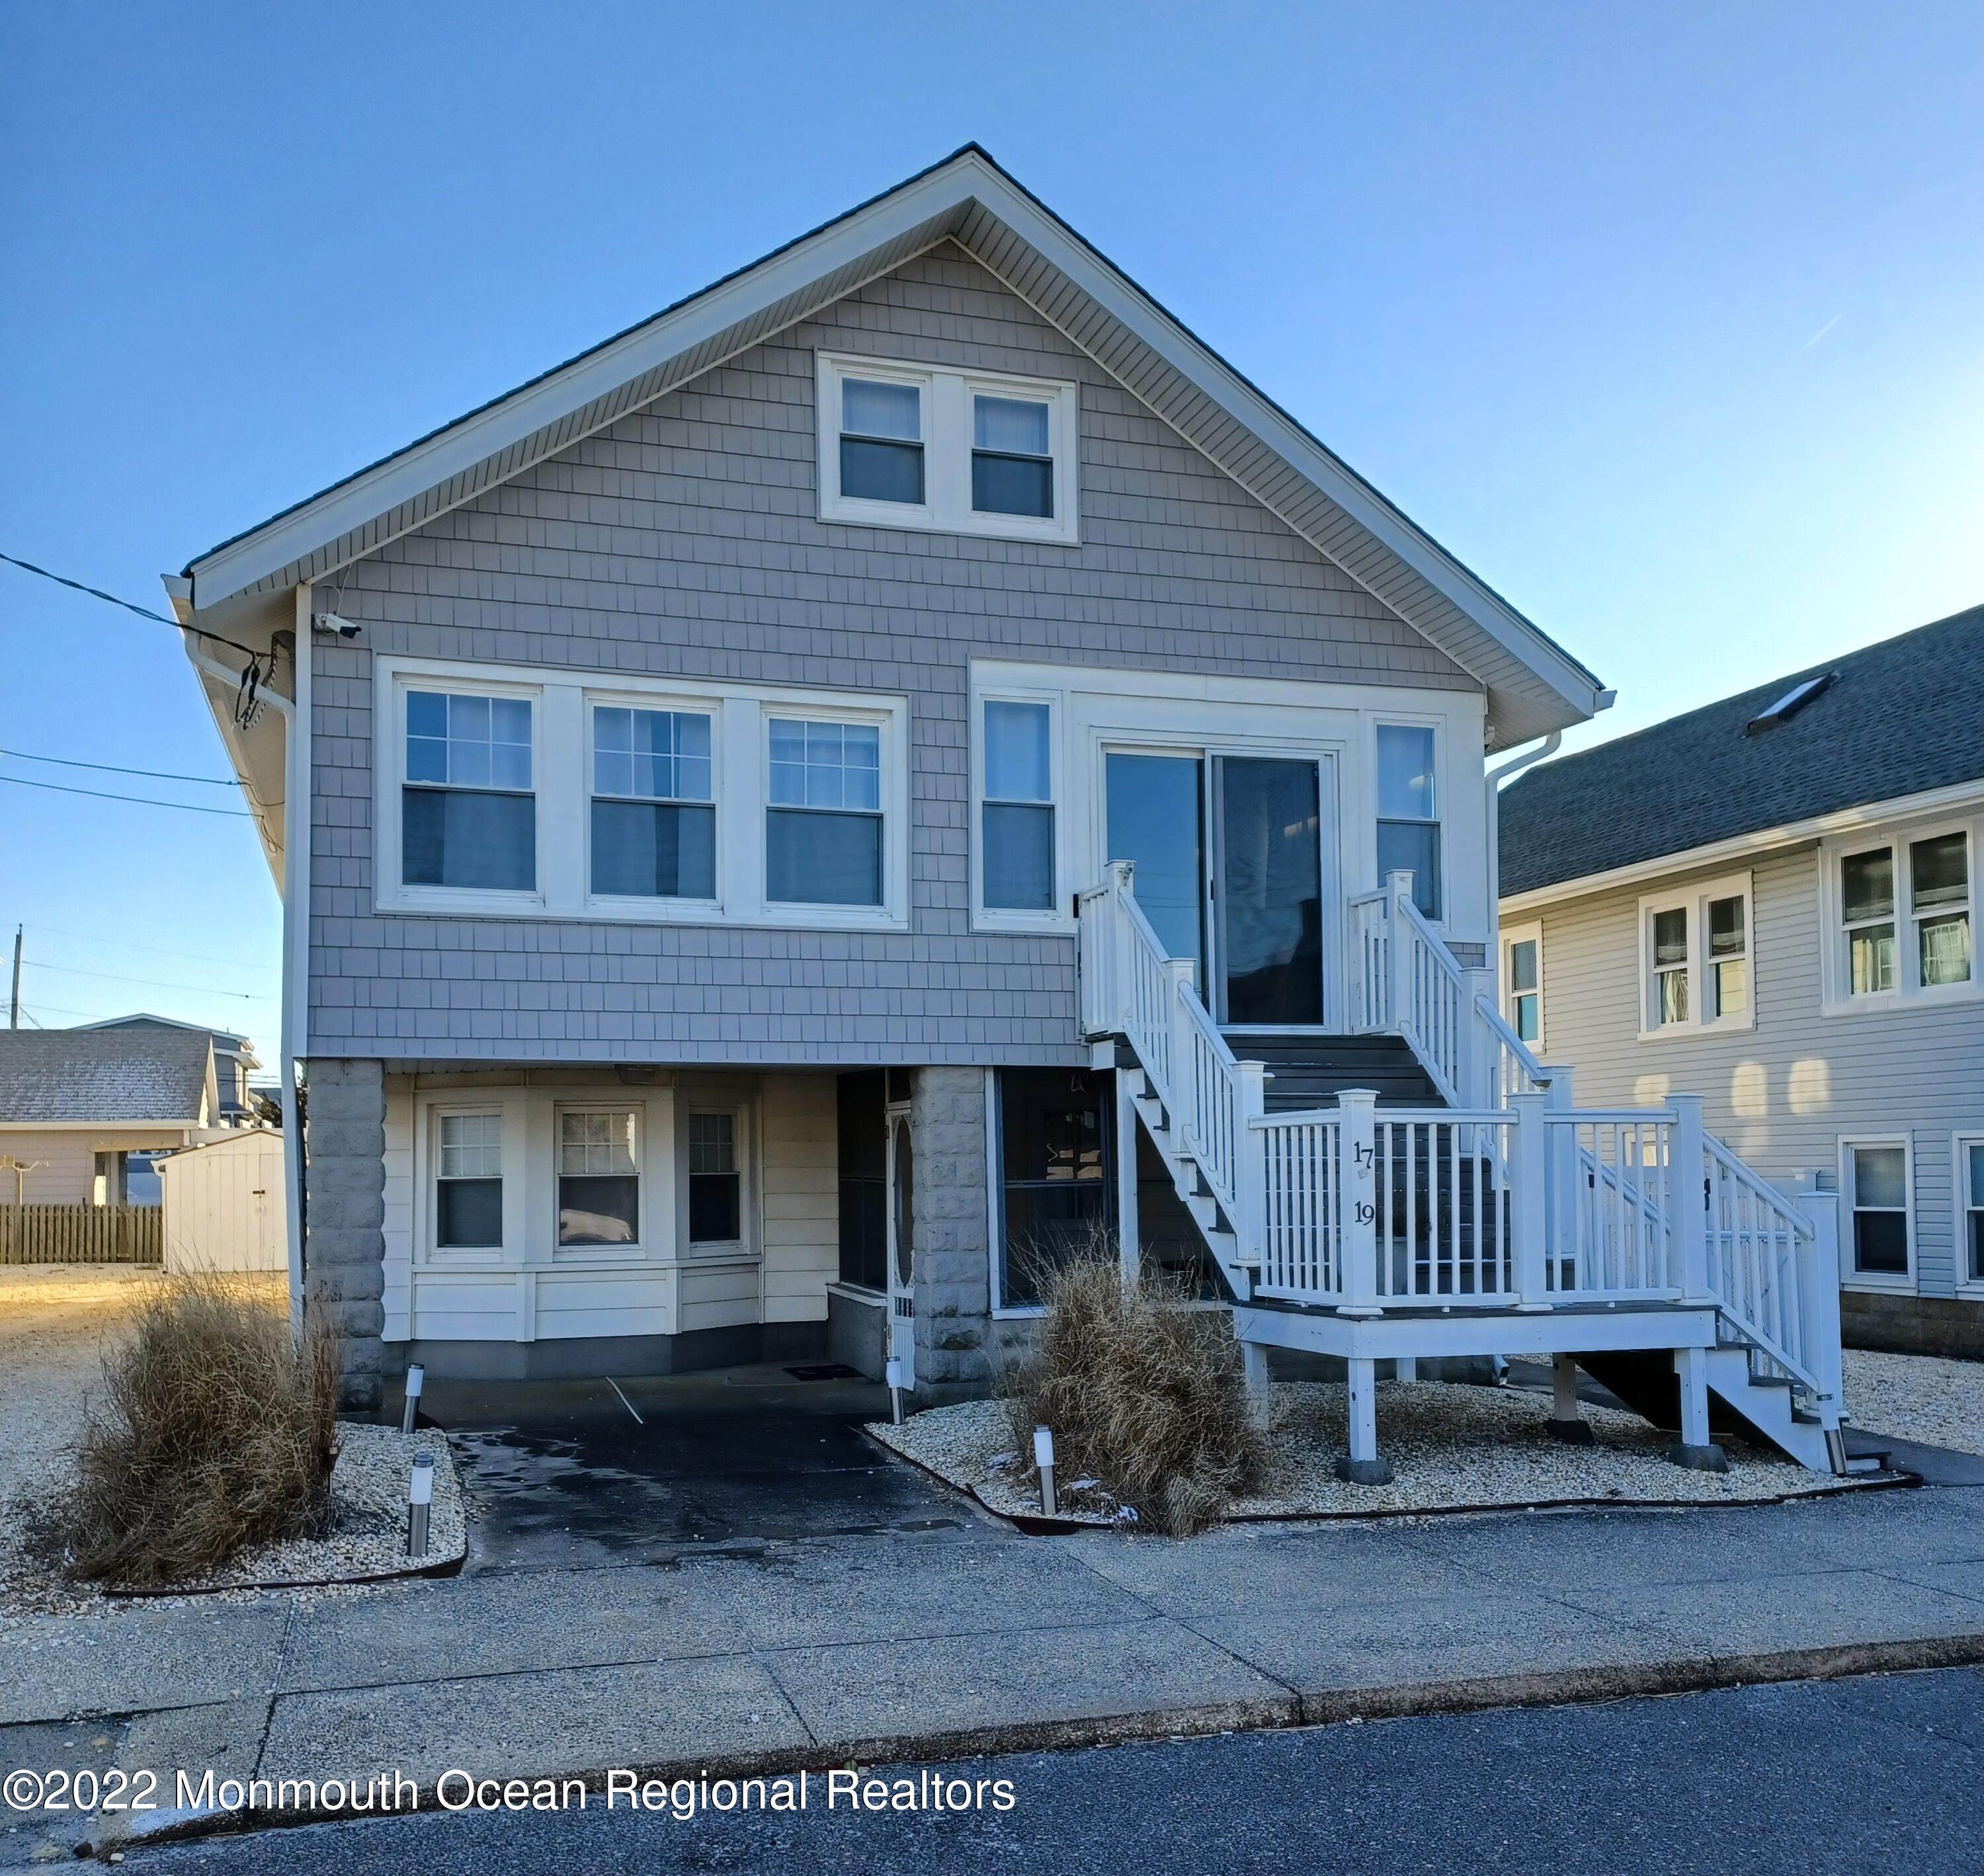 Property for Sale at 17 I Street Seaside Park, New Jersey 08752 United States